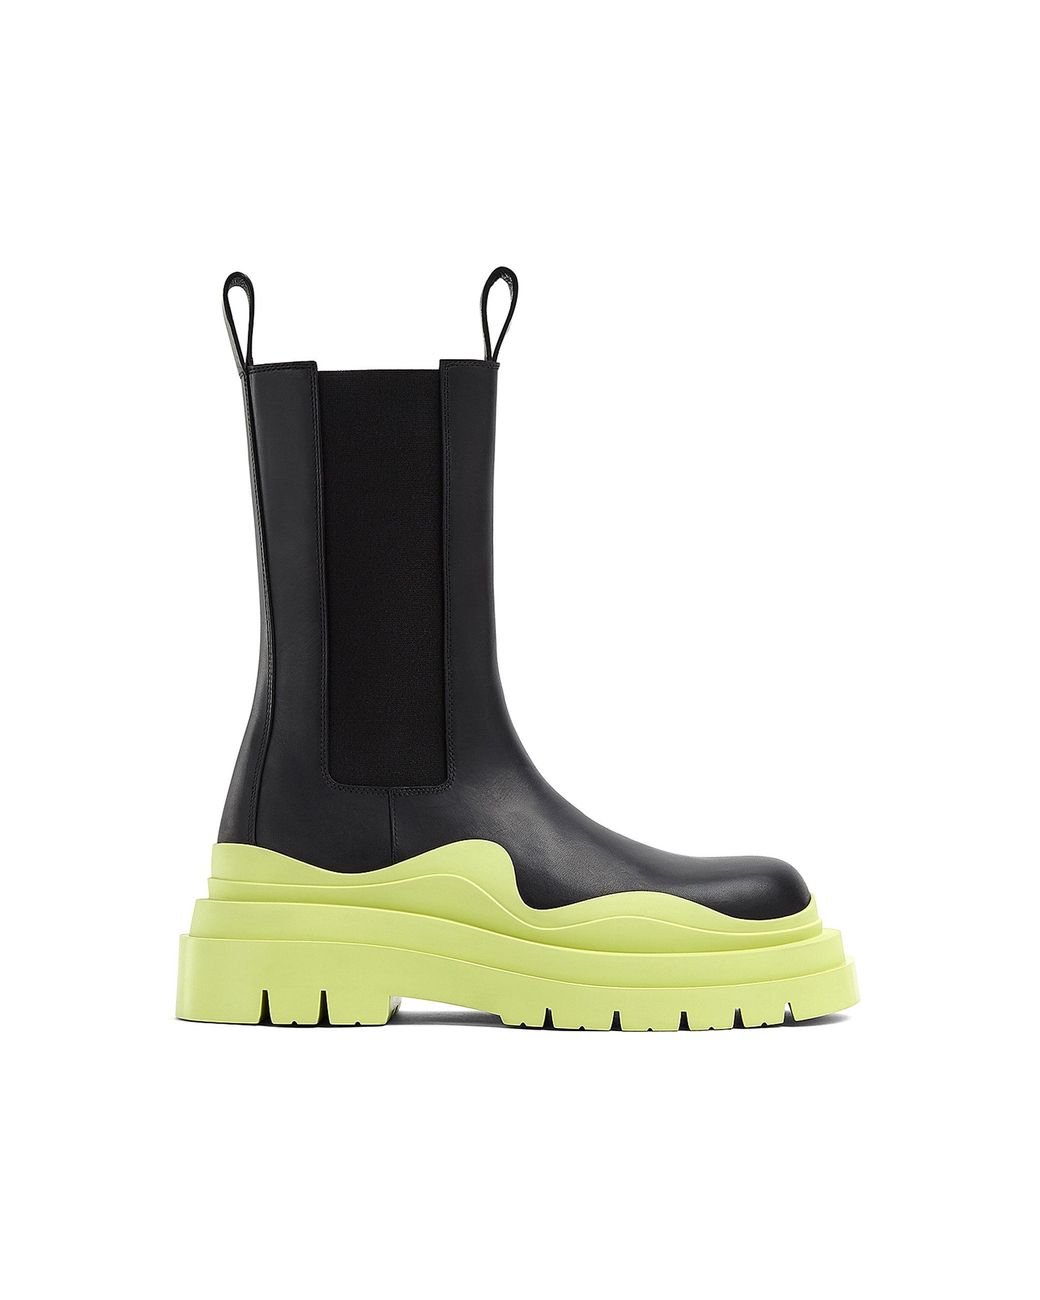 Bottega Veneta The Tire Leather Ankle Boots in Green - Lyst